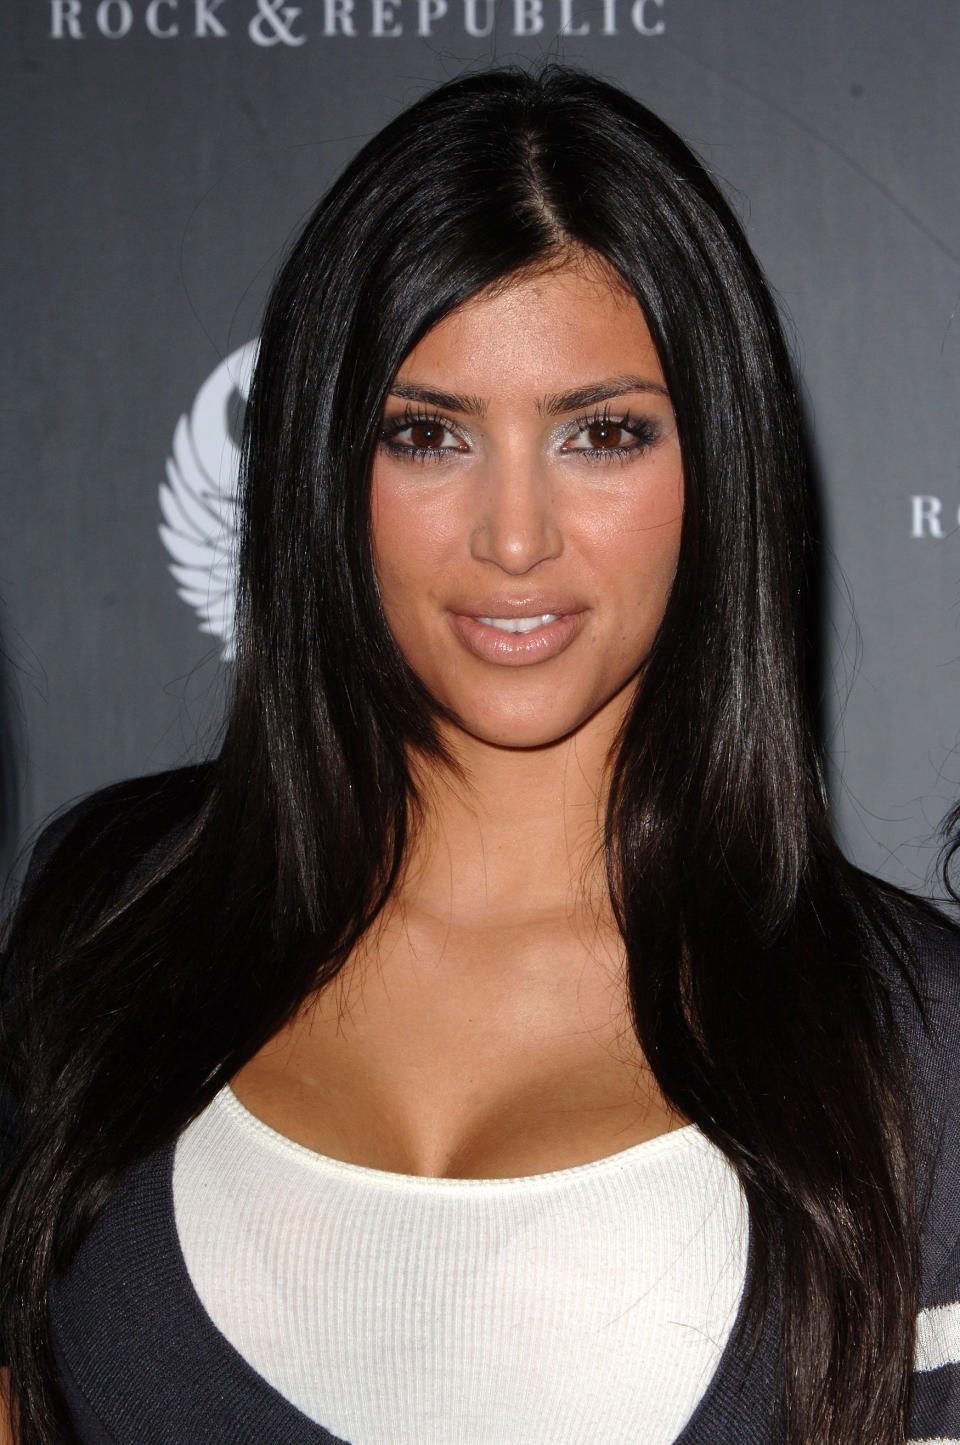 Kim Kardashian at the Rock & Republic after party in West Hollywood, Los Angeles on October 18, 2006. Abaca/EMPICS Entertainment